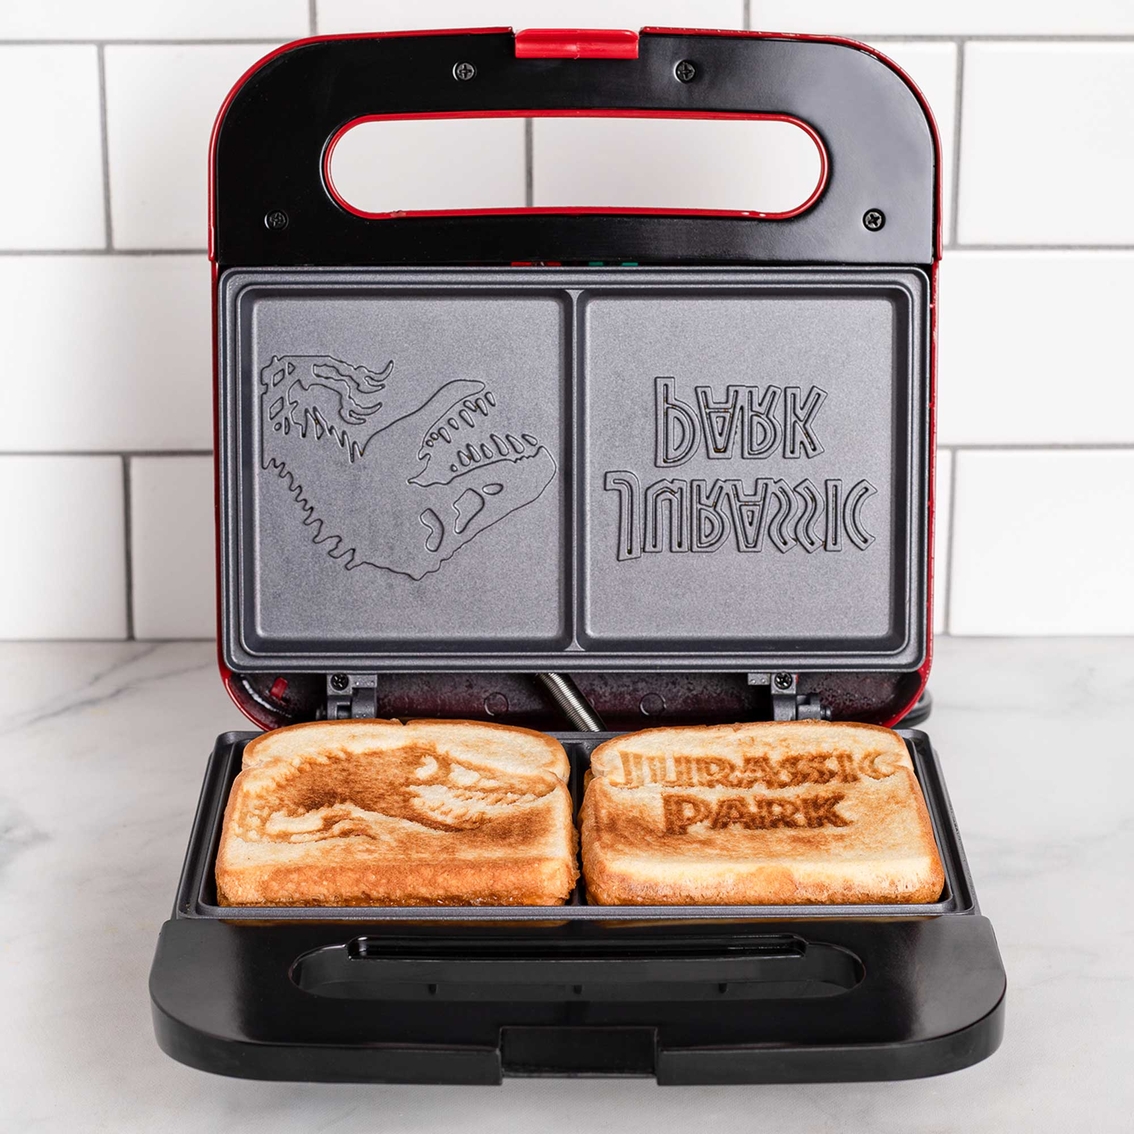 Jurassic Park Grilled Cheese Maker - Image 5 of 6